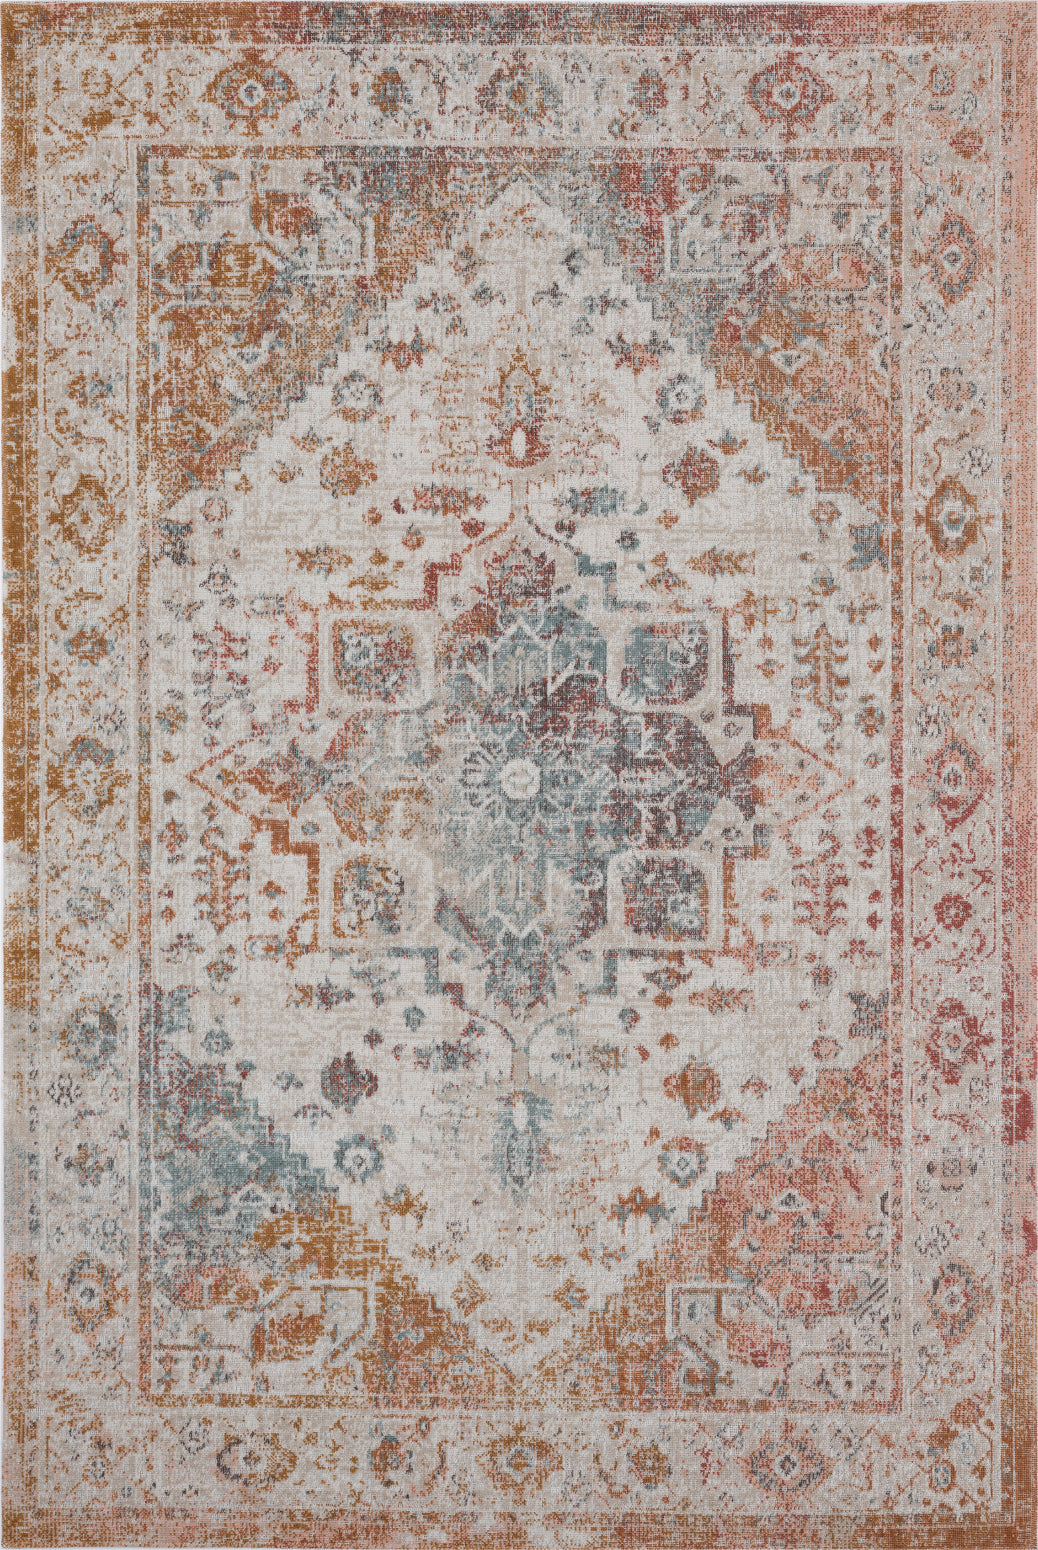 LR Resources Antiquity Ombre at Dusk Beige / Cream Area Rug main image